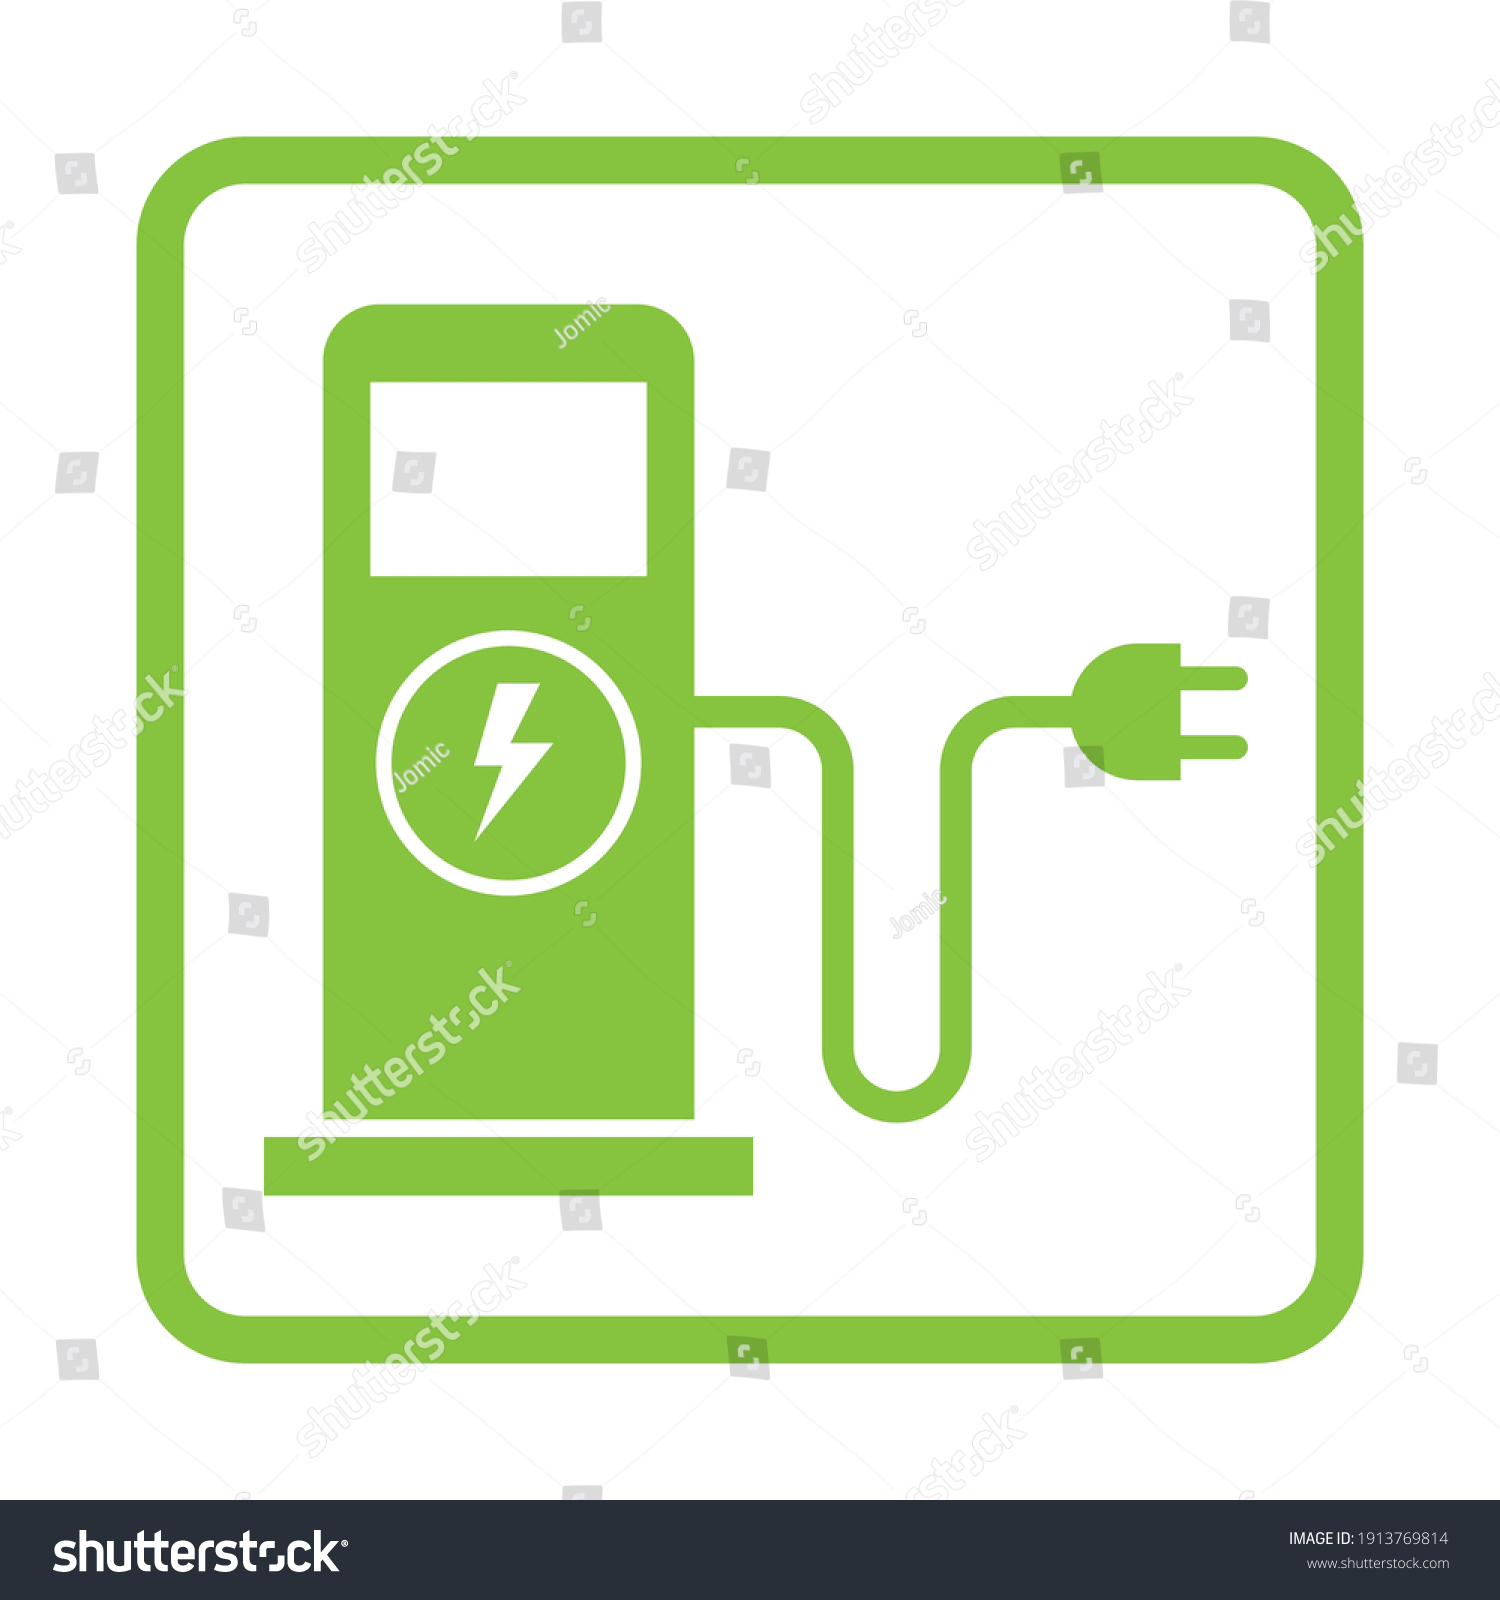 SVG of Green eco electric fuel pump icon, Charging point station for hybrid vehicles cars square sign, isolated on white background, Vector illustration svg